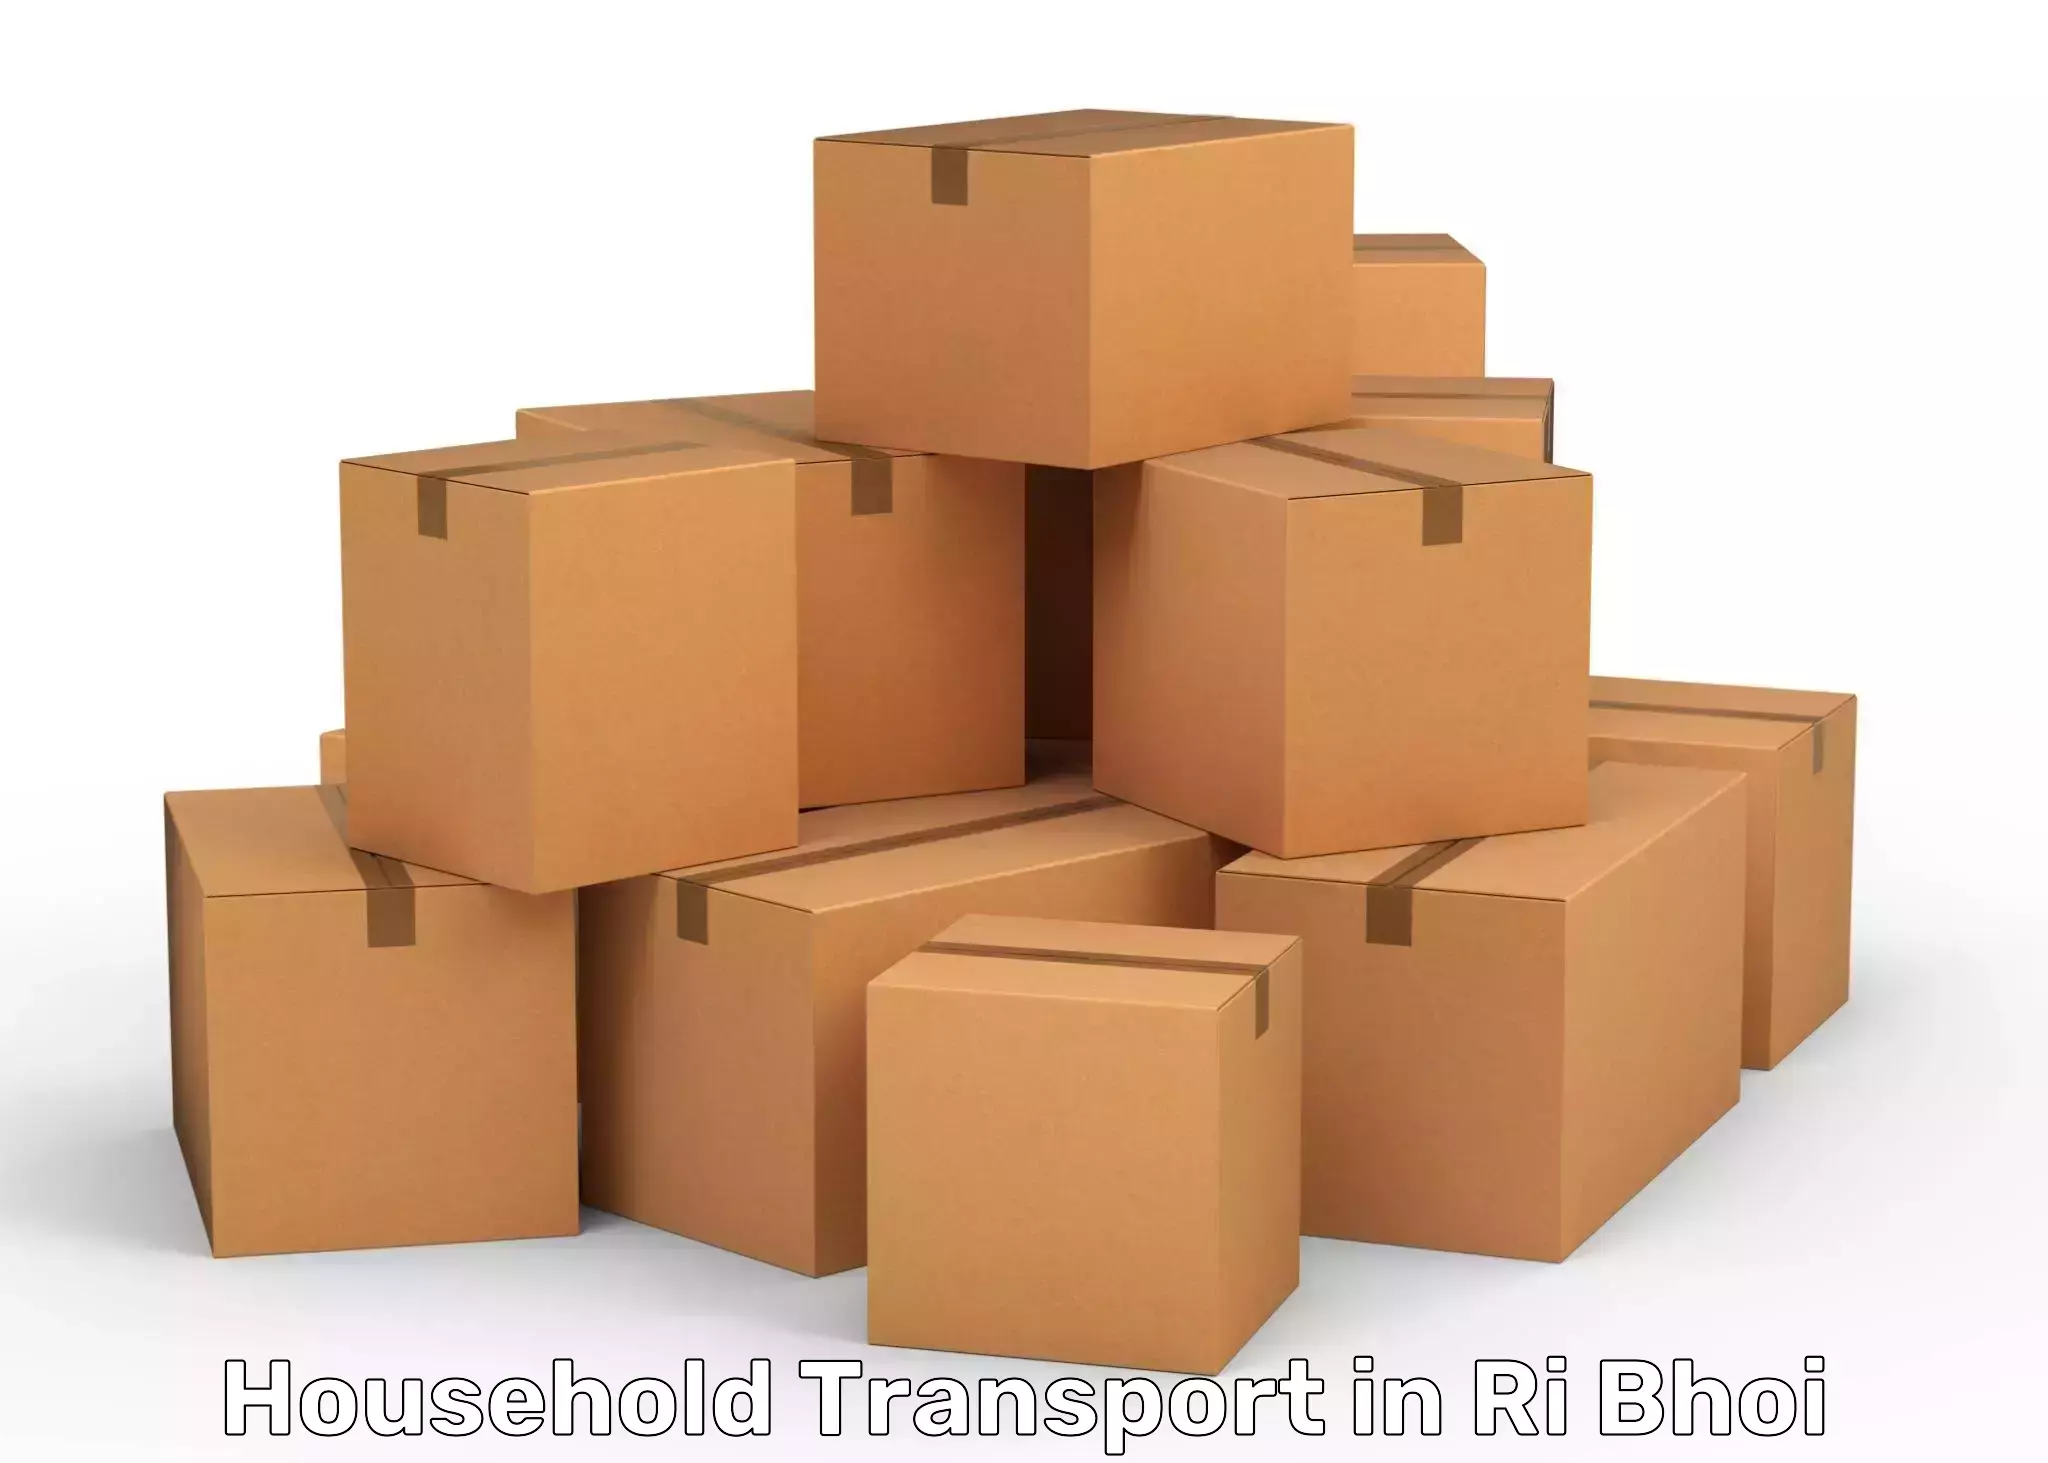 Quality relocation assistance in Ri Bhoi